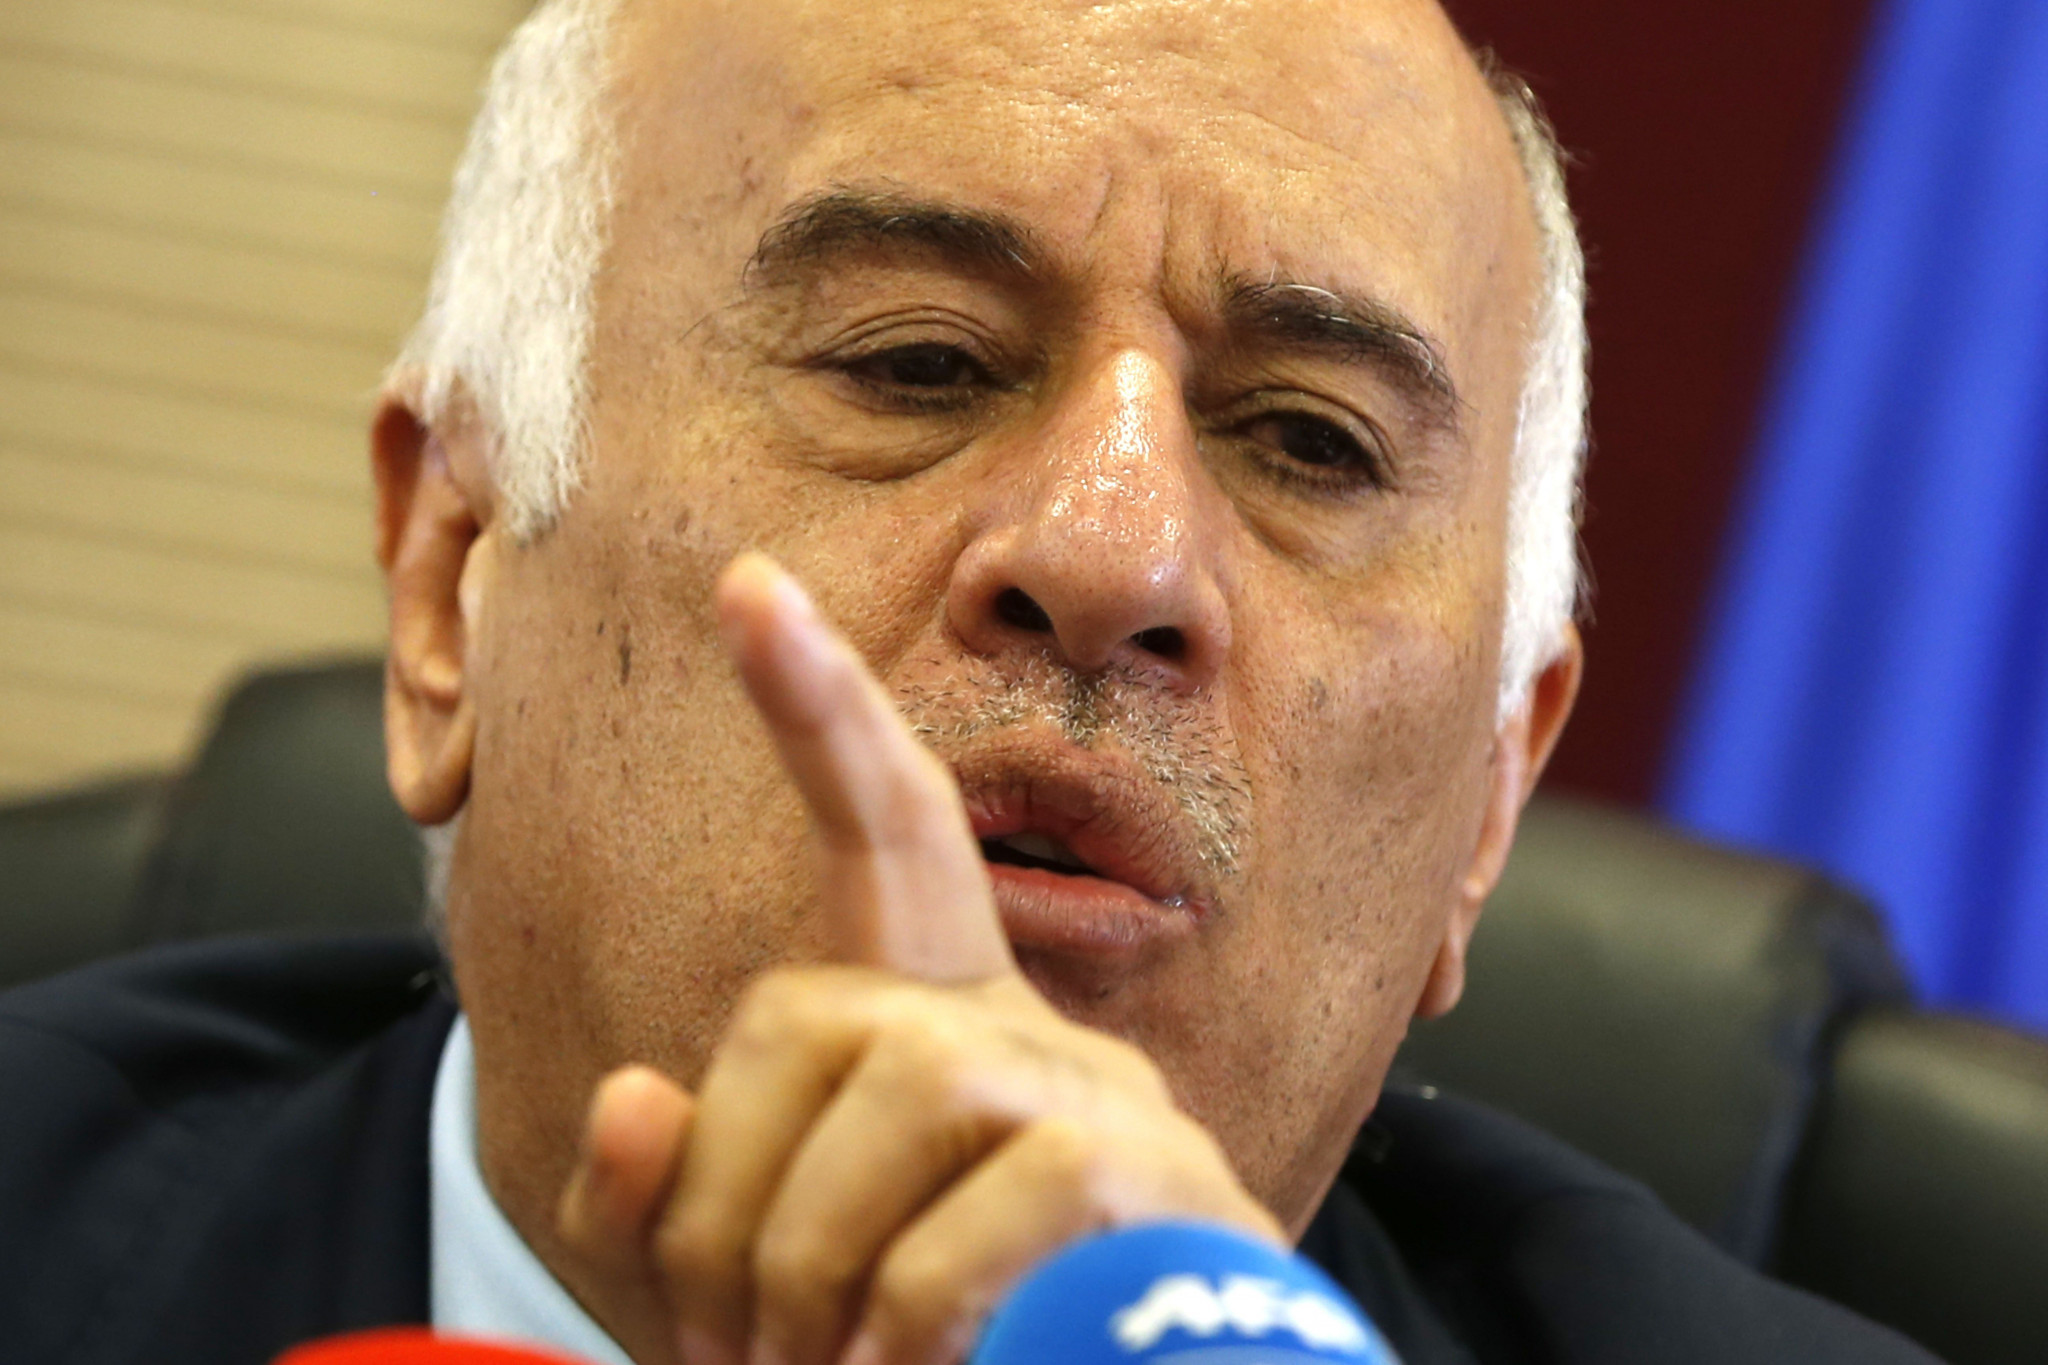 The Israel Government has called upon the IOC to ban Palestine Olympic Committee chairman Jibril Rajoub after he was suspended by FIFA ©Getty Images